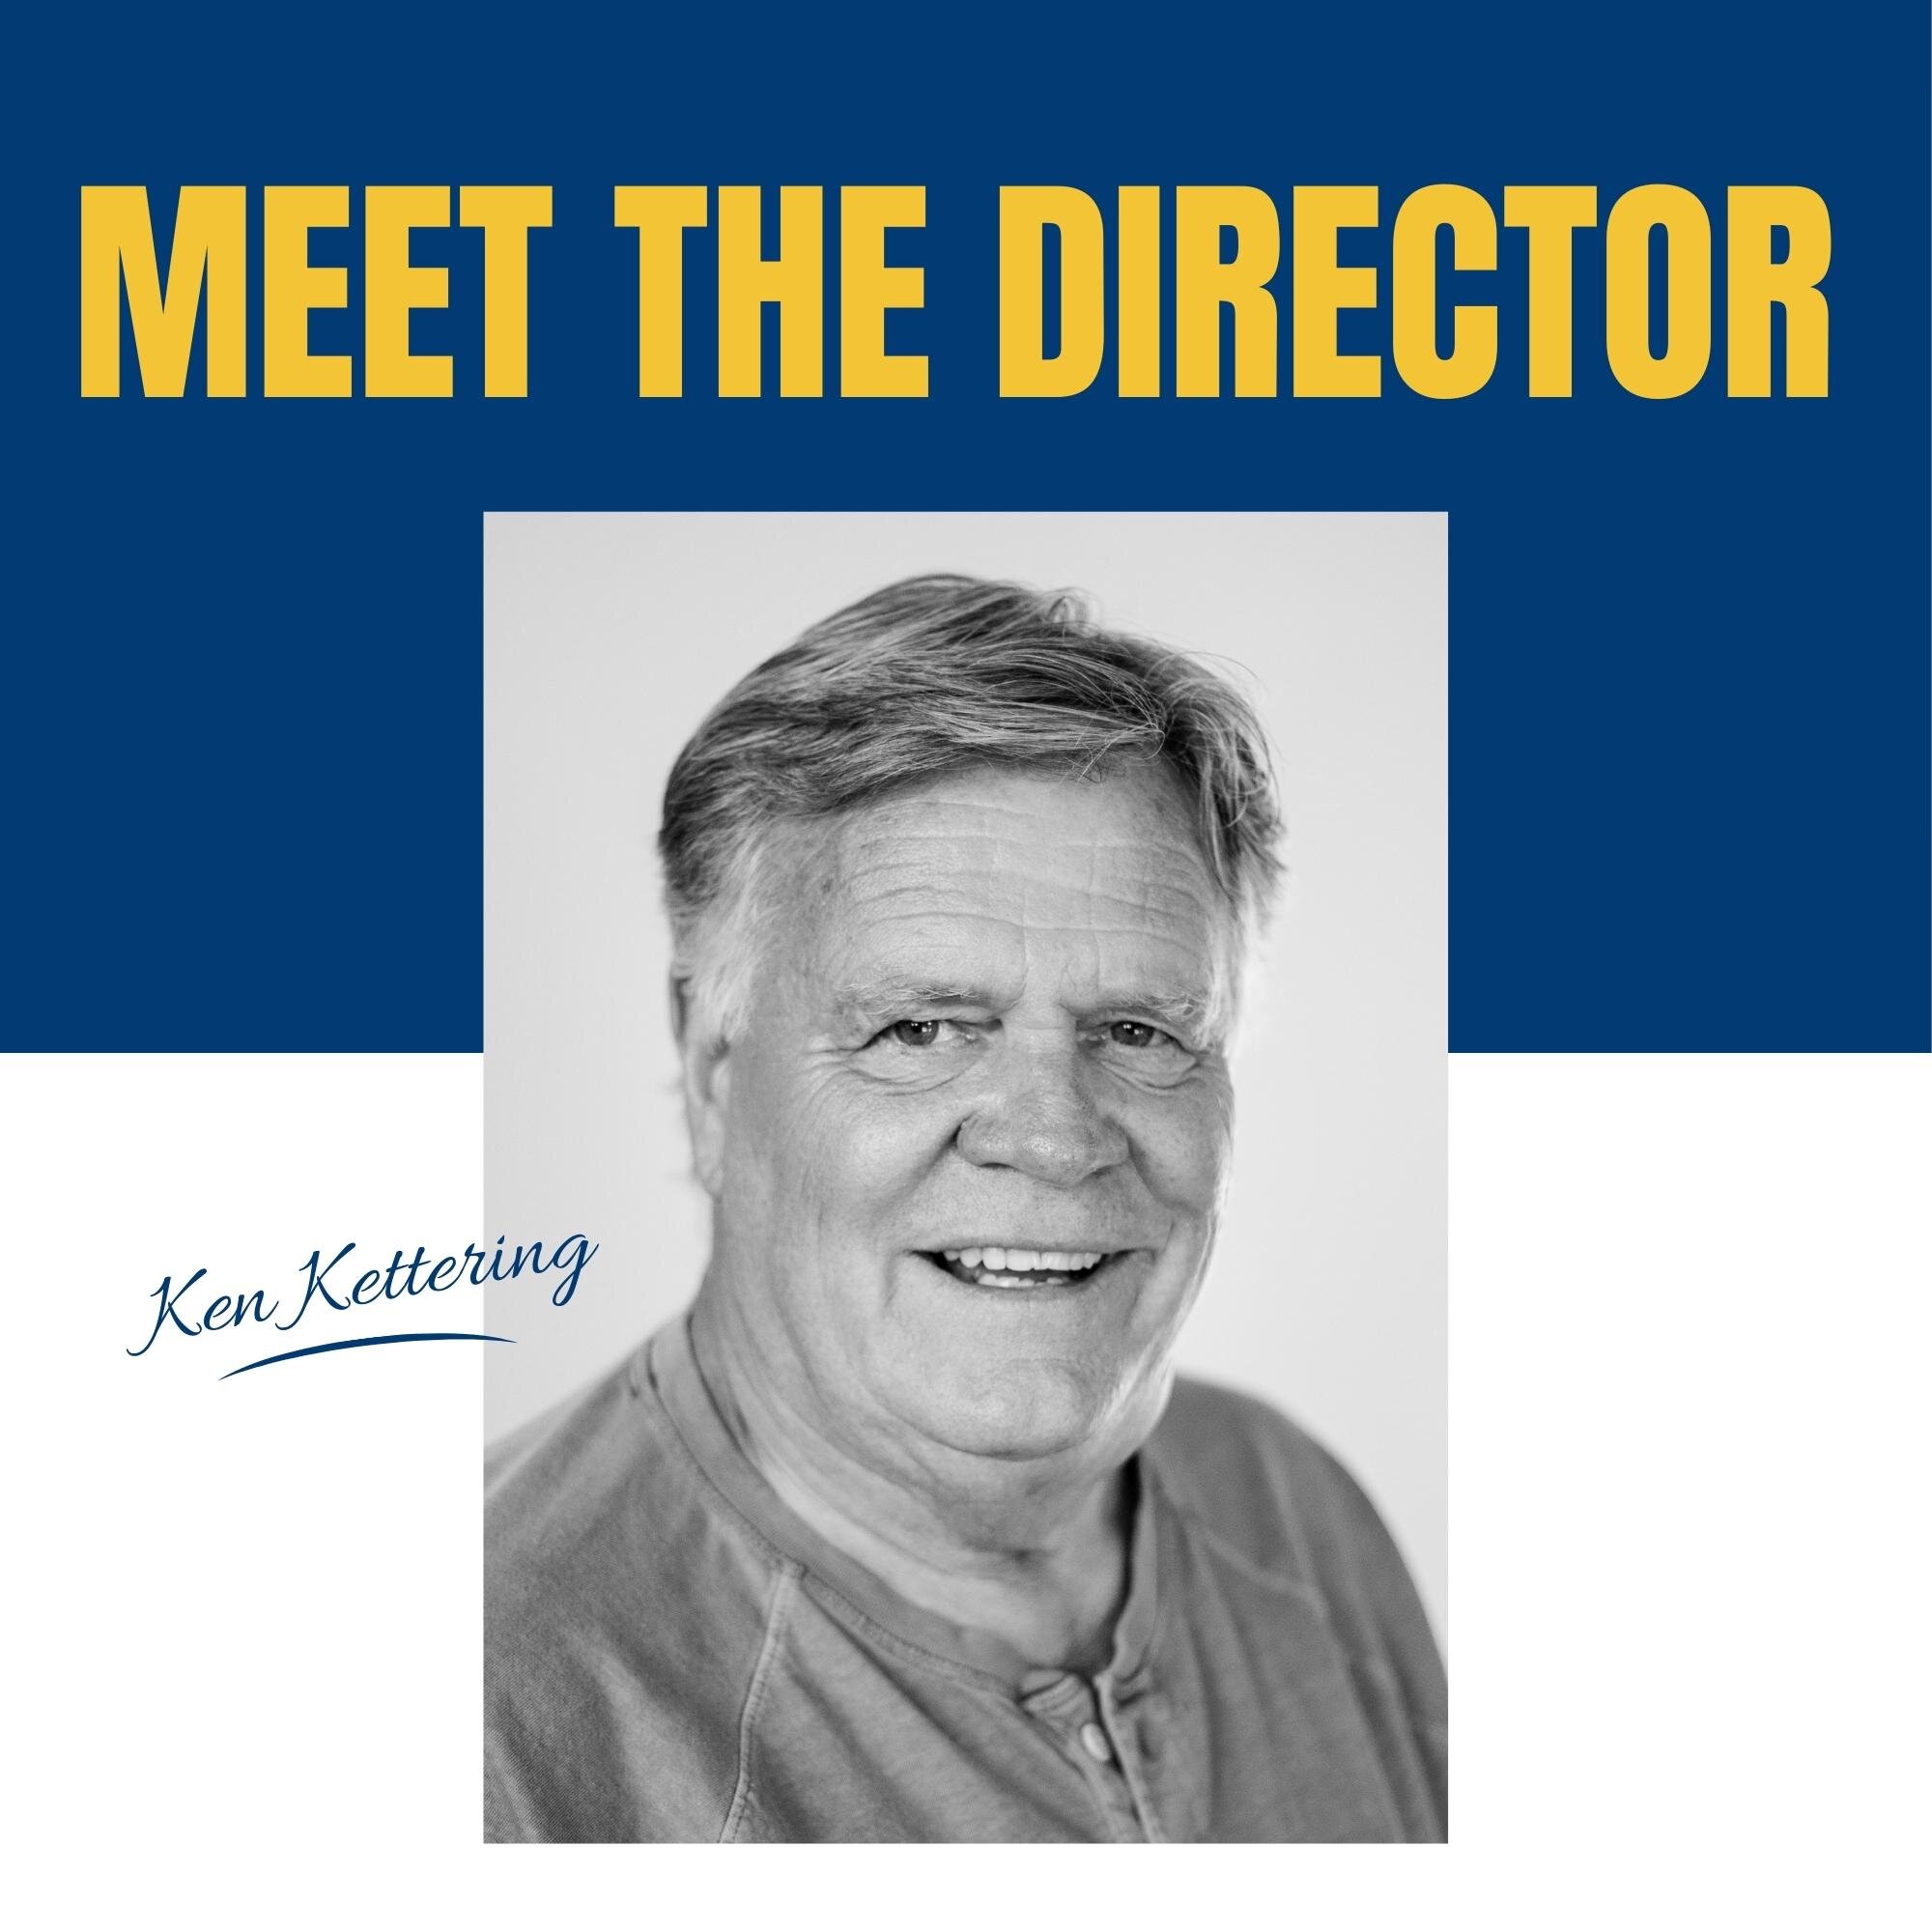 Meet the director of The Sower!

Ken Kettering has a 25 year background of producing and directing over 40 classic plays and musicals. We are thrilled to have had him as a part of our team. We're thankful for his work in bringing the story of The Sow